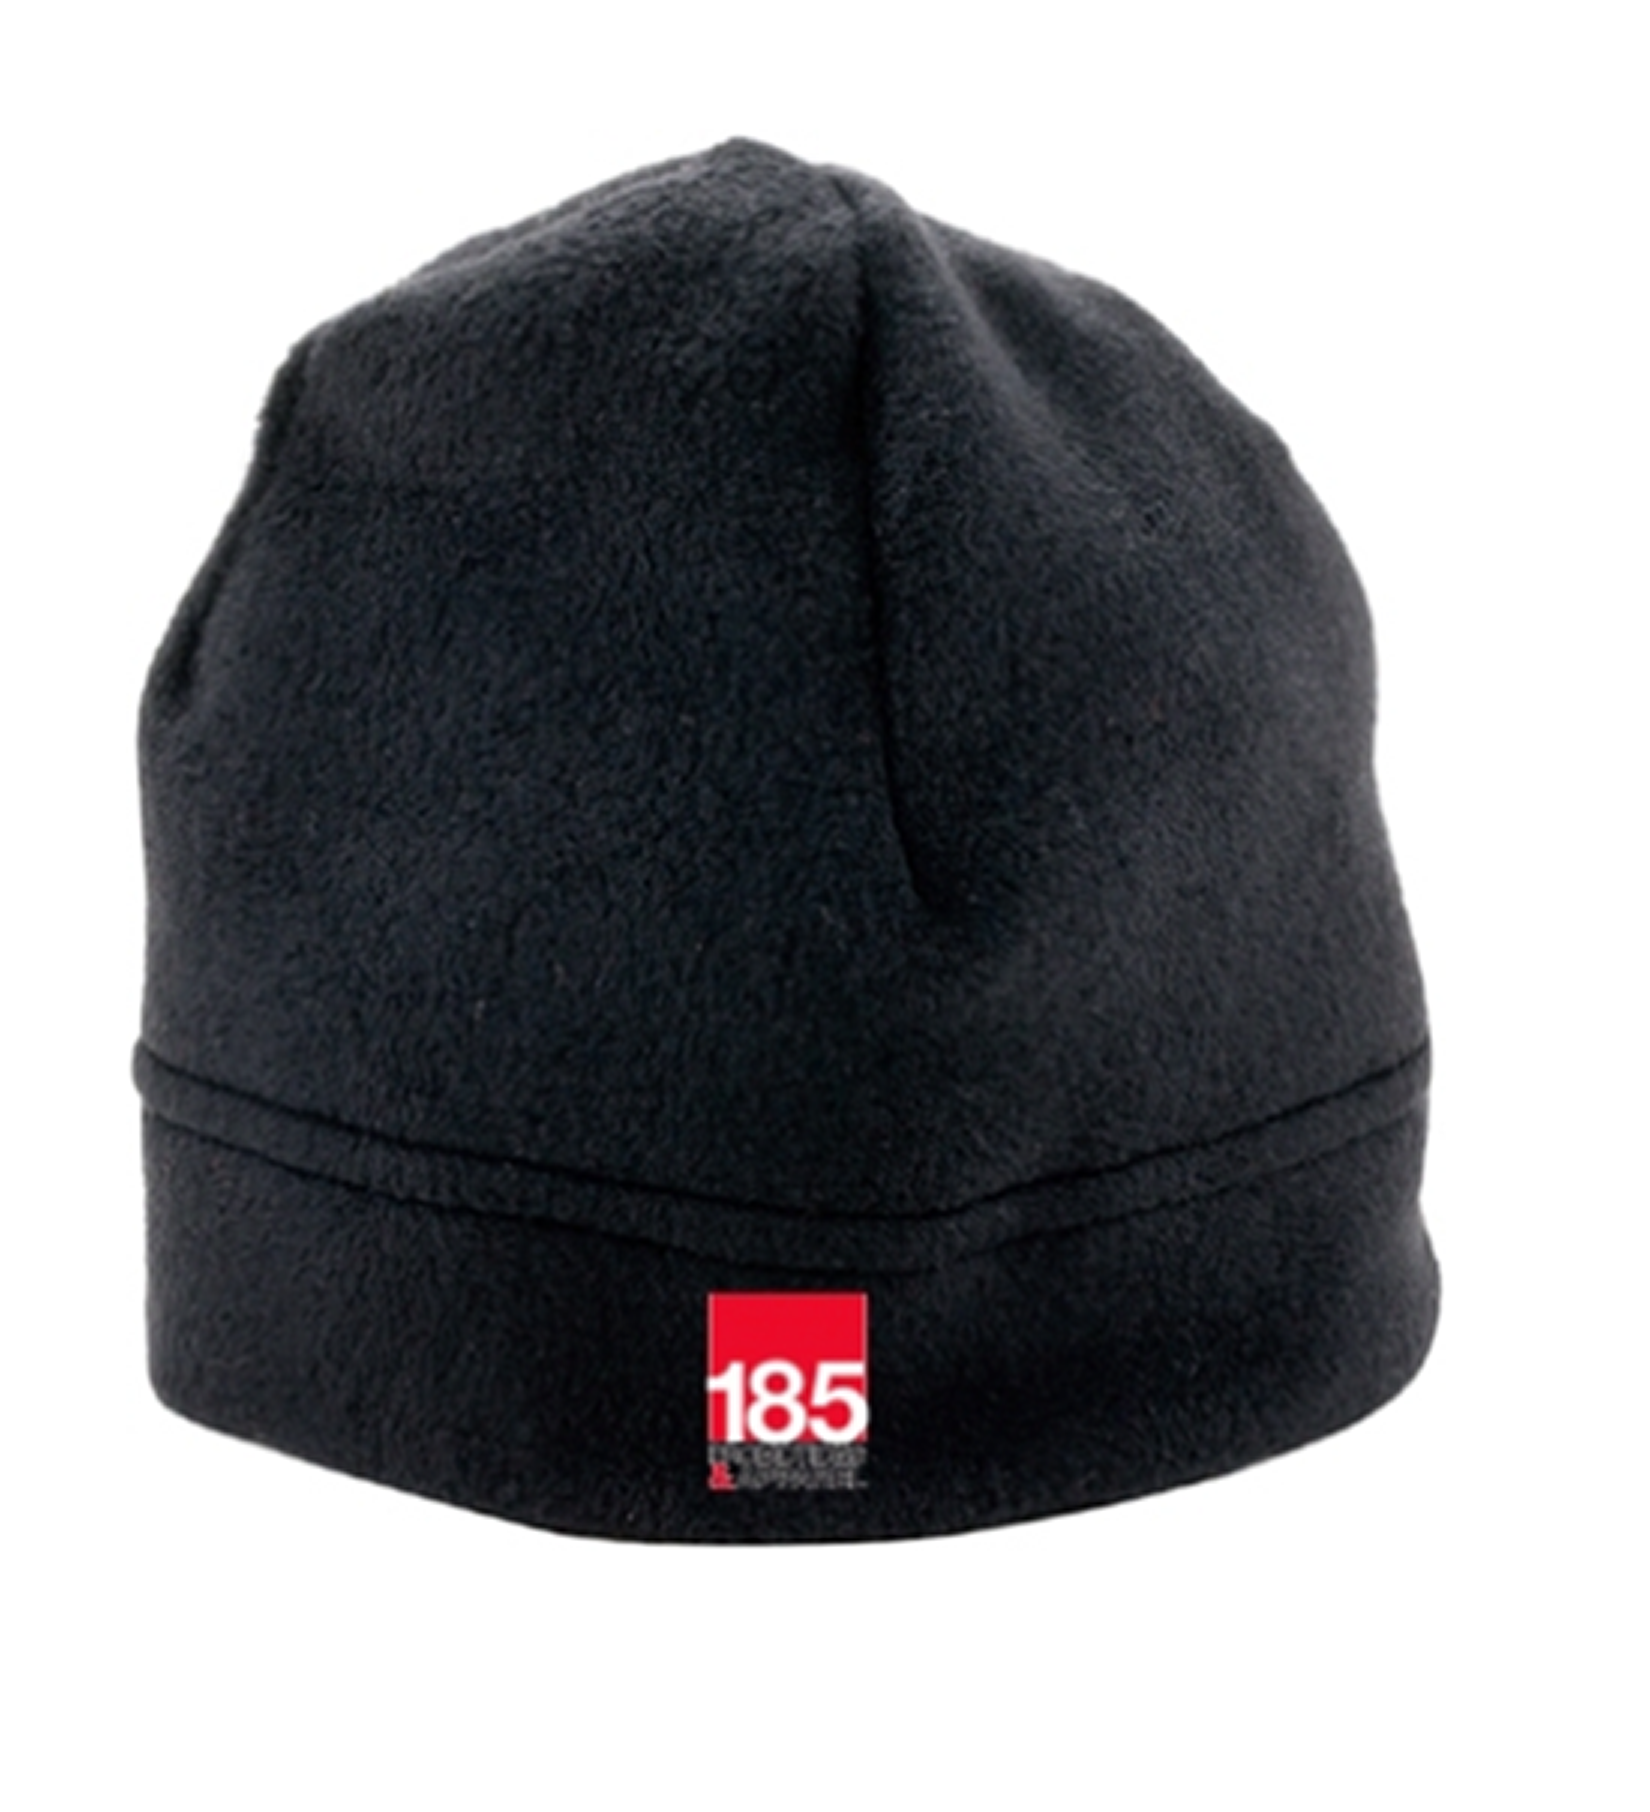 https://185promotions.com/wp-content/uploads/2020/02/185-BEANIE-SAMPLE@3x.png